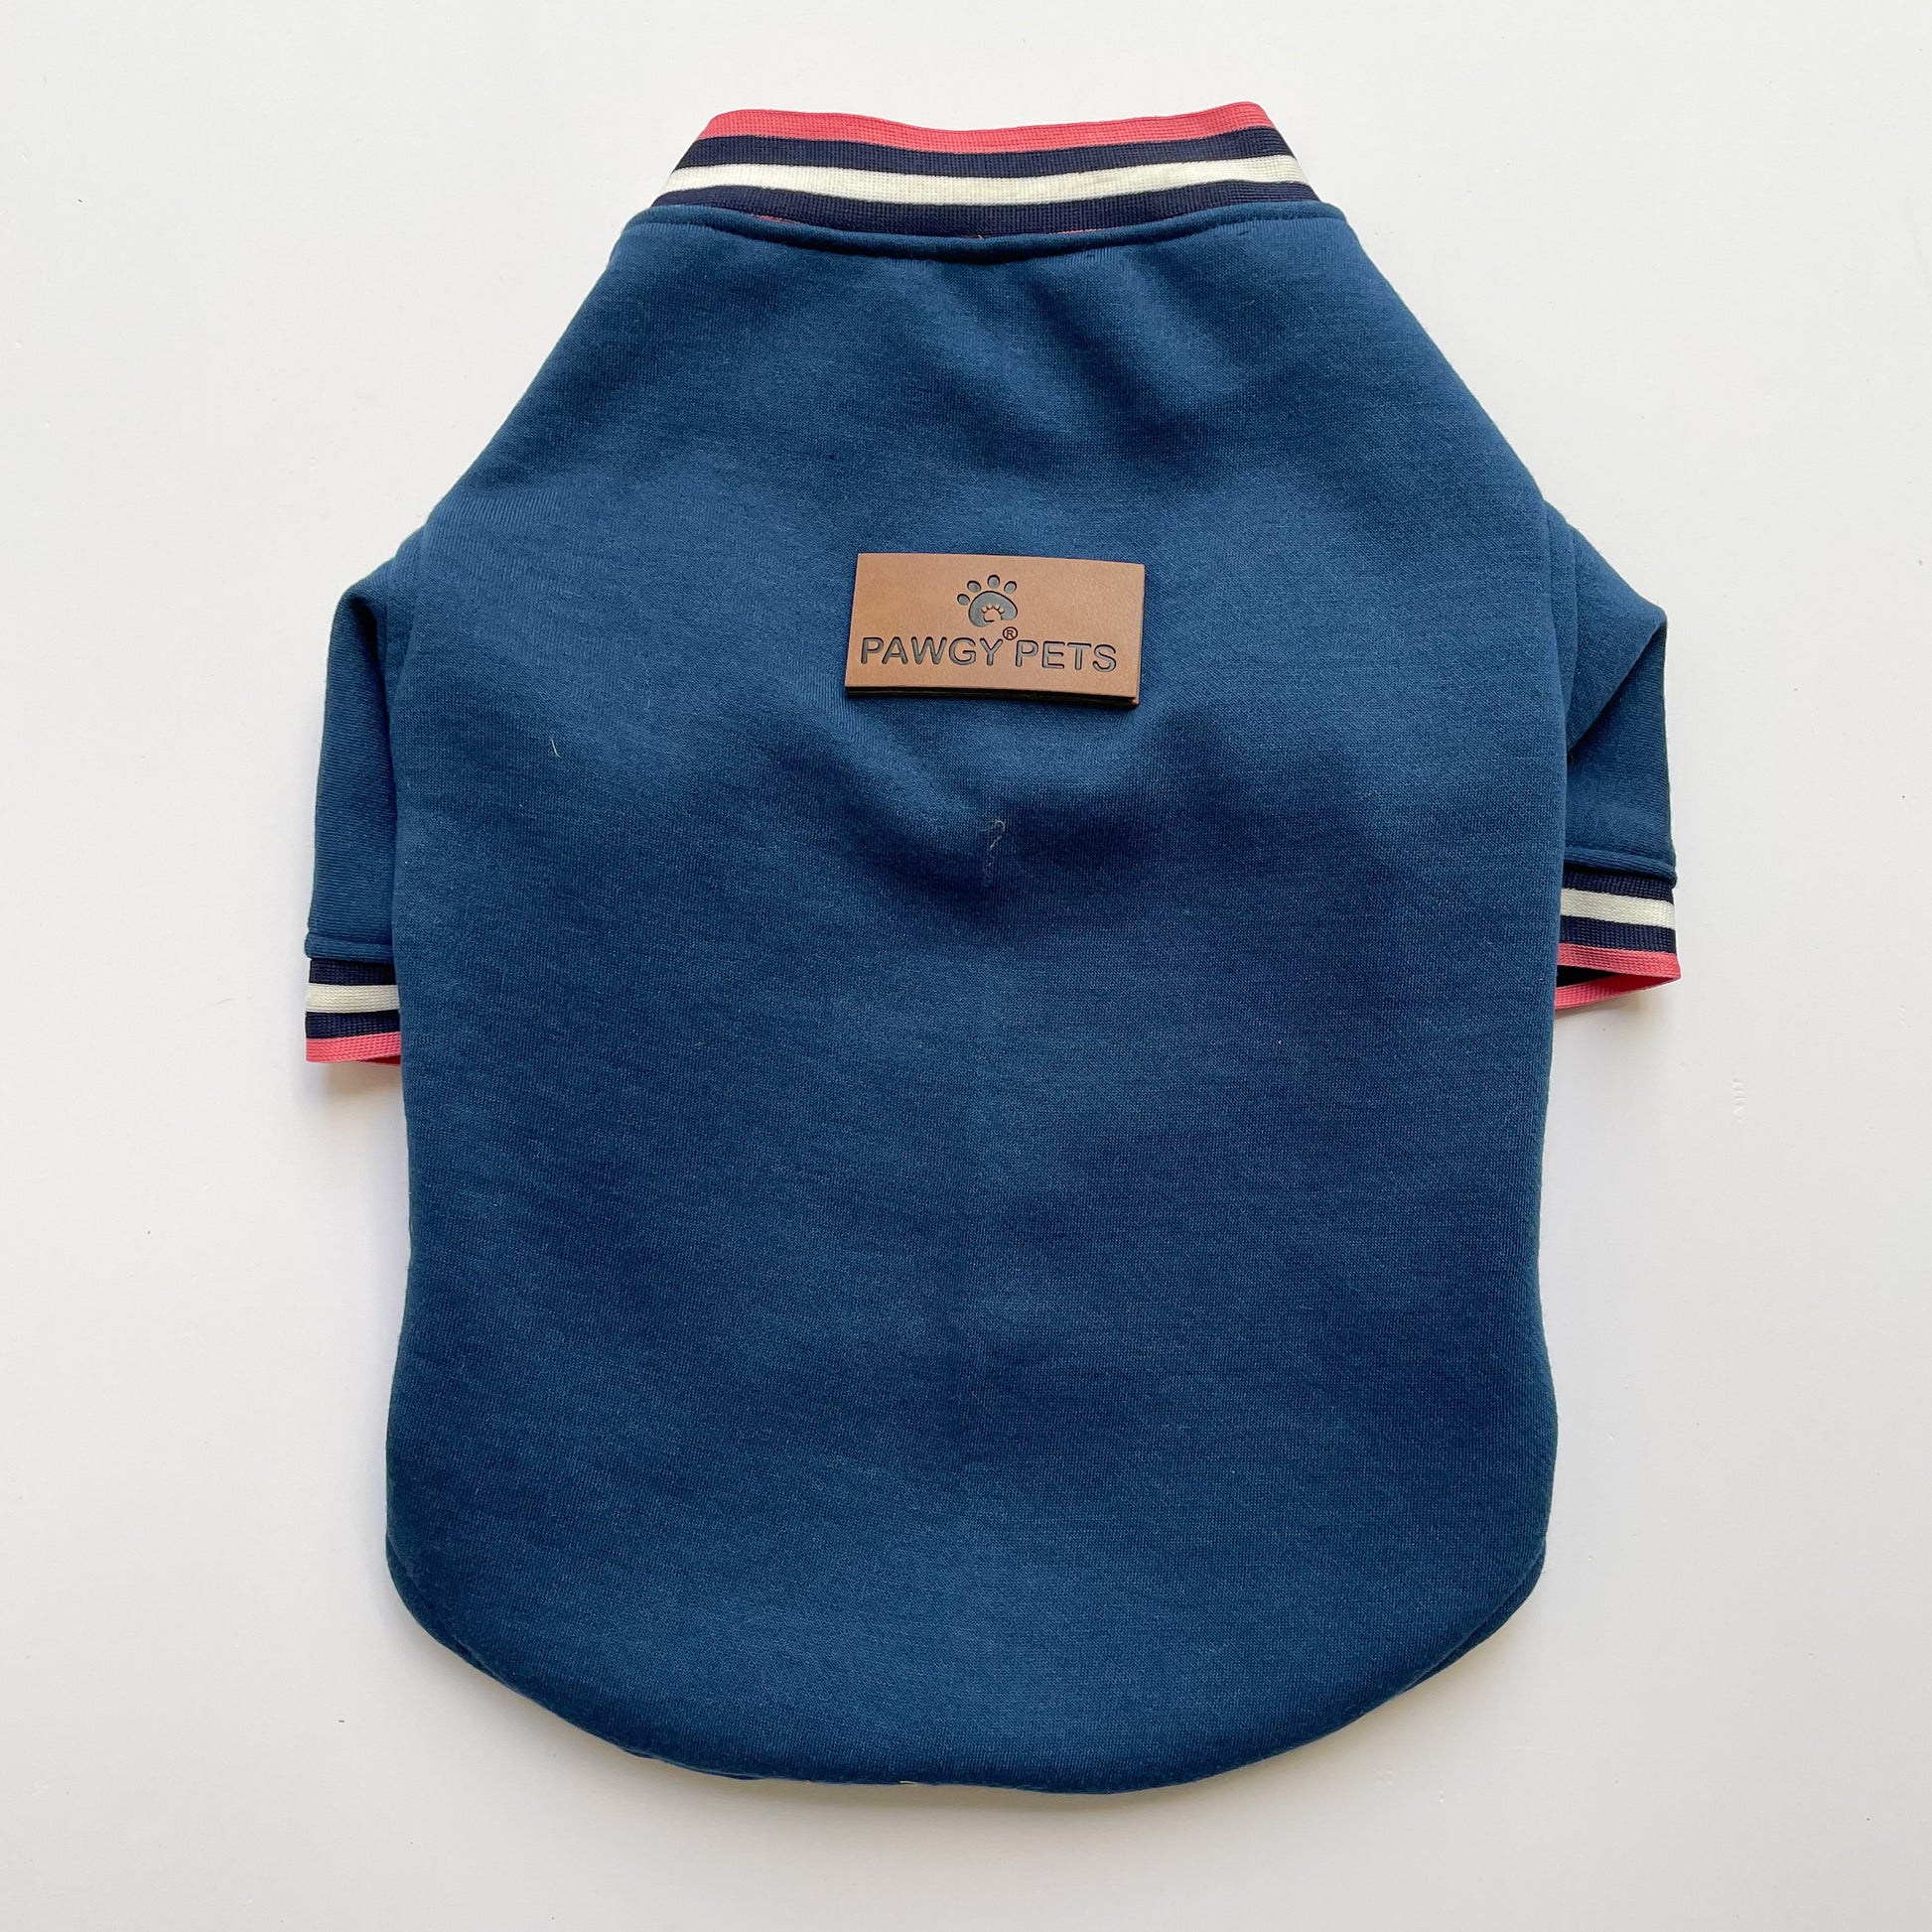 Pawgy Pets Candy blue Sweatshirt for Dogs & Cats